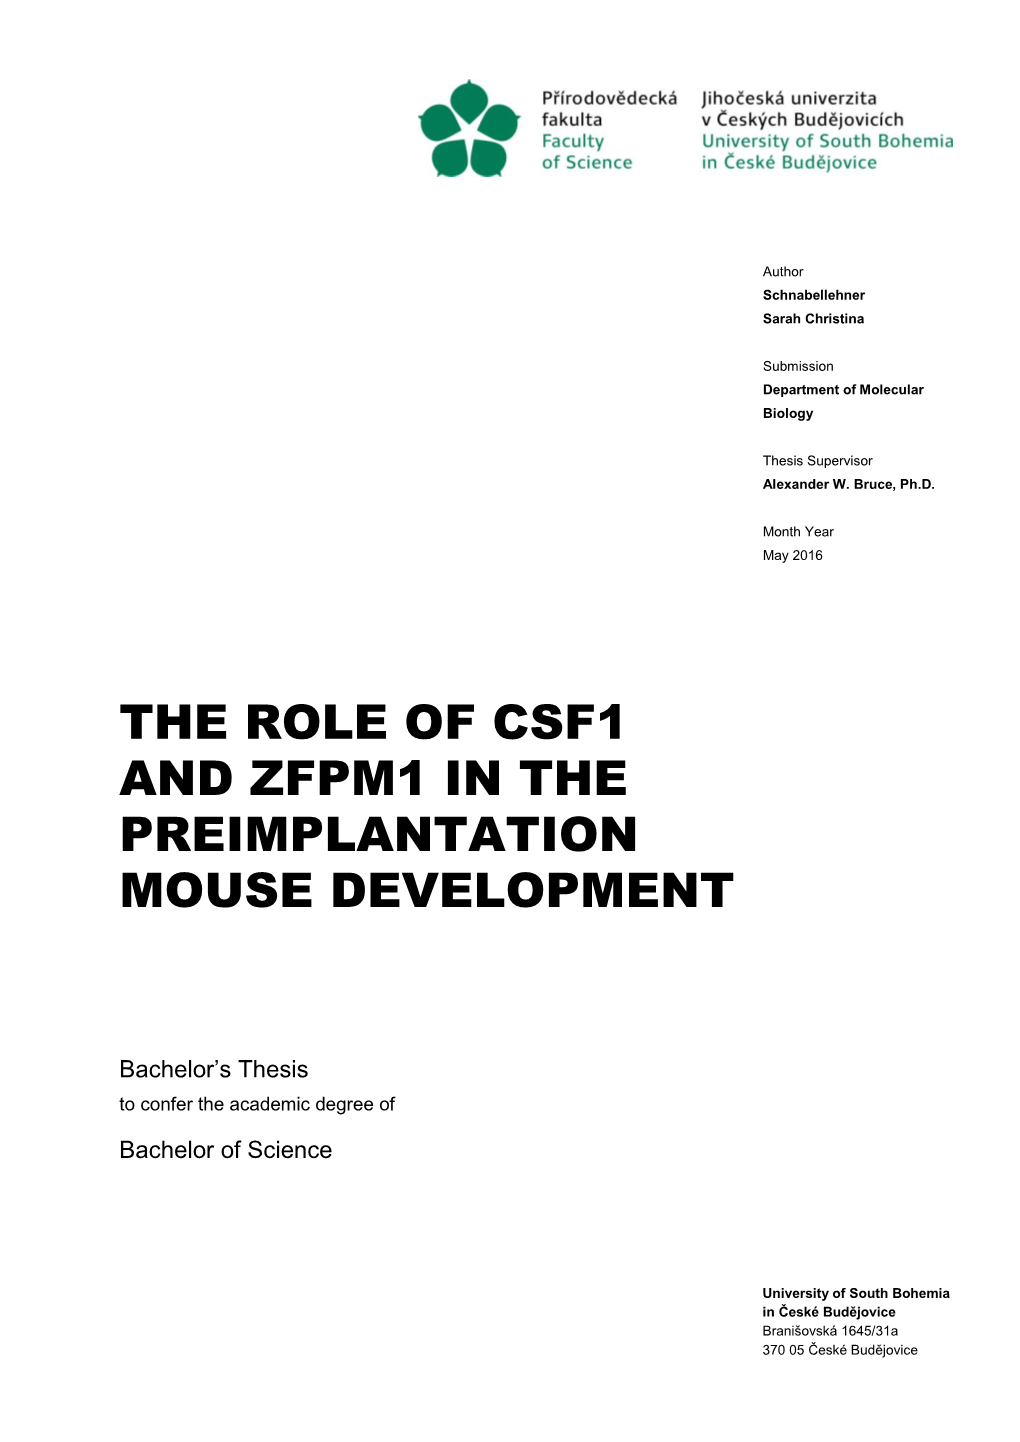 The Role of Csf1 and Zfpm1 in the Preimplantation Mouse Development